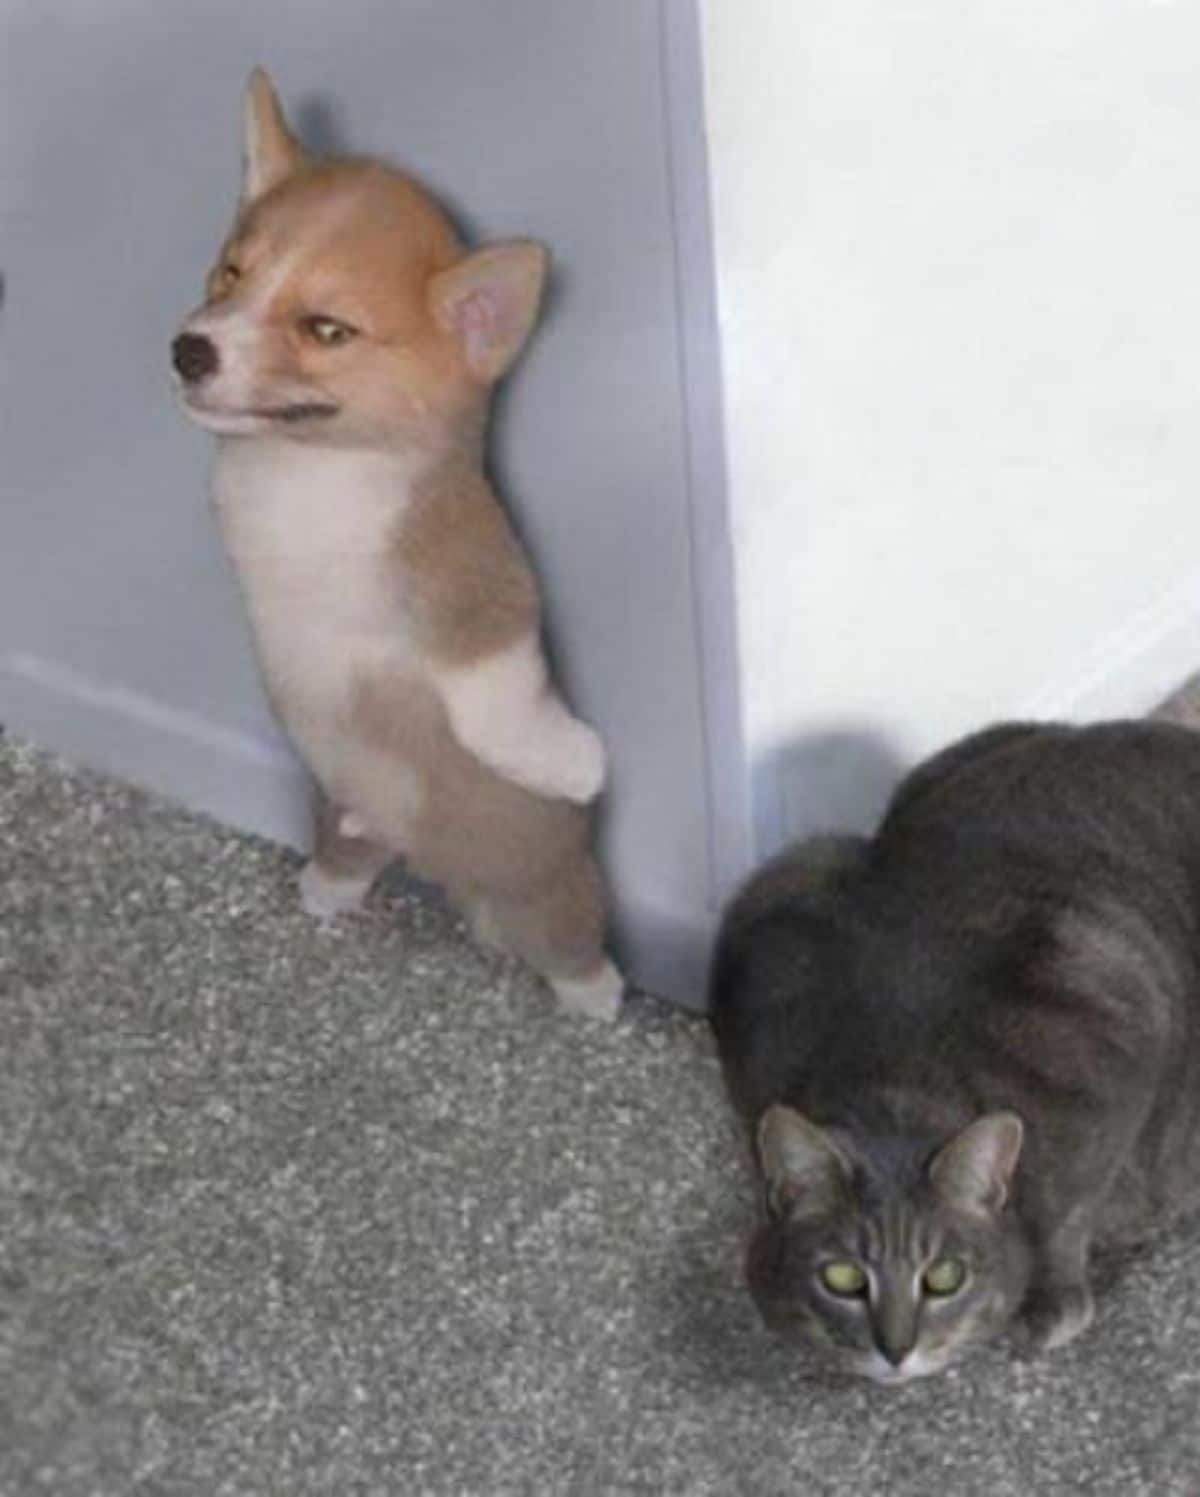 brown and white corgi puppy standing on hind legs with a sneaky look directed at a grey tabby cat next to it